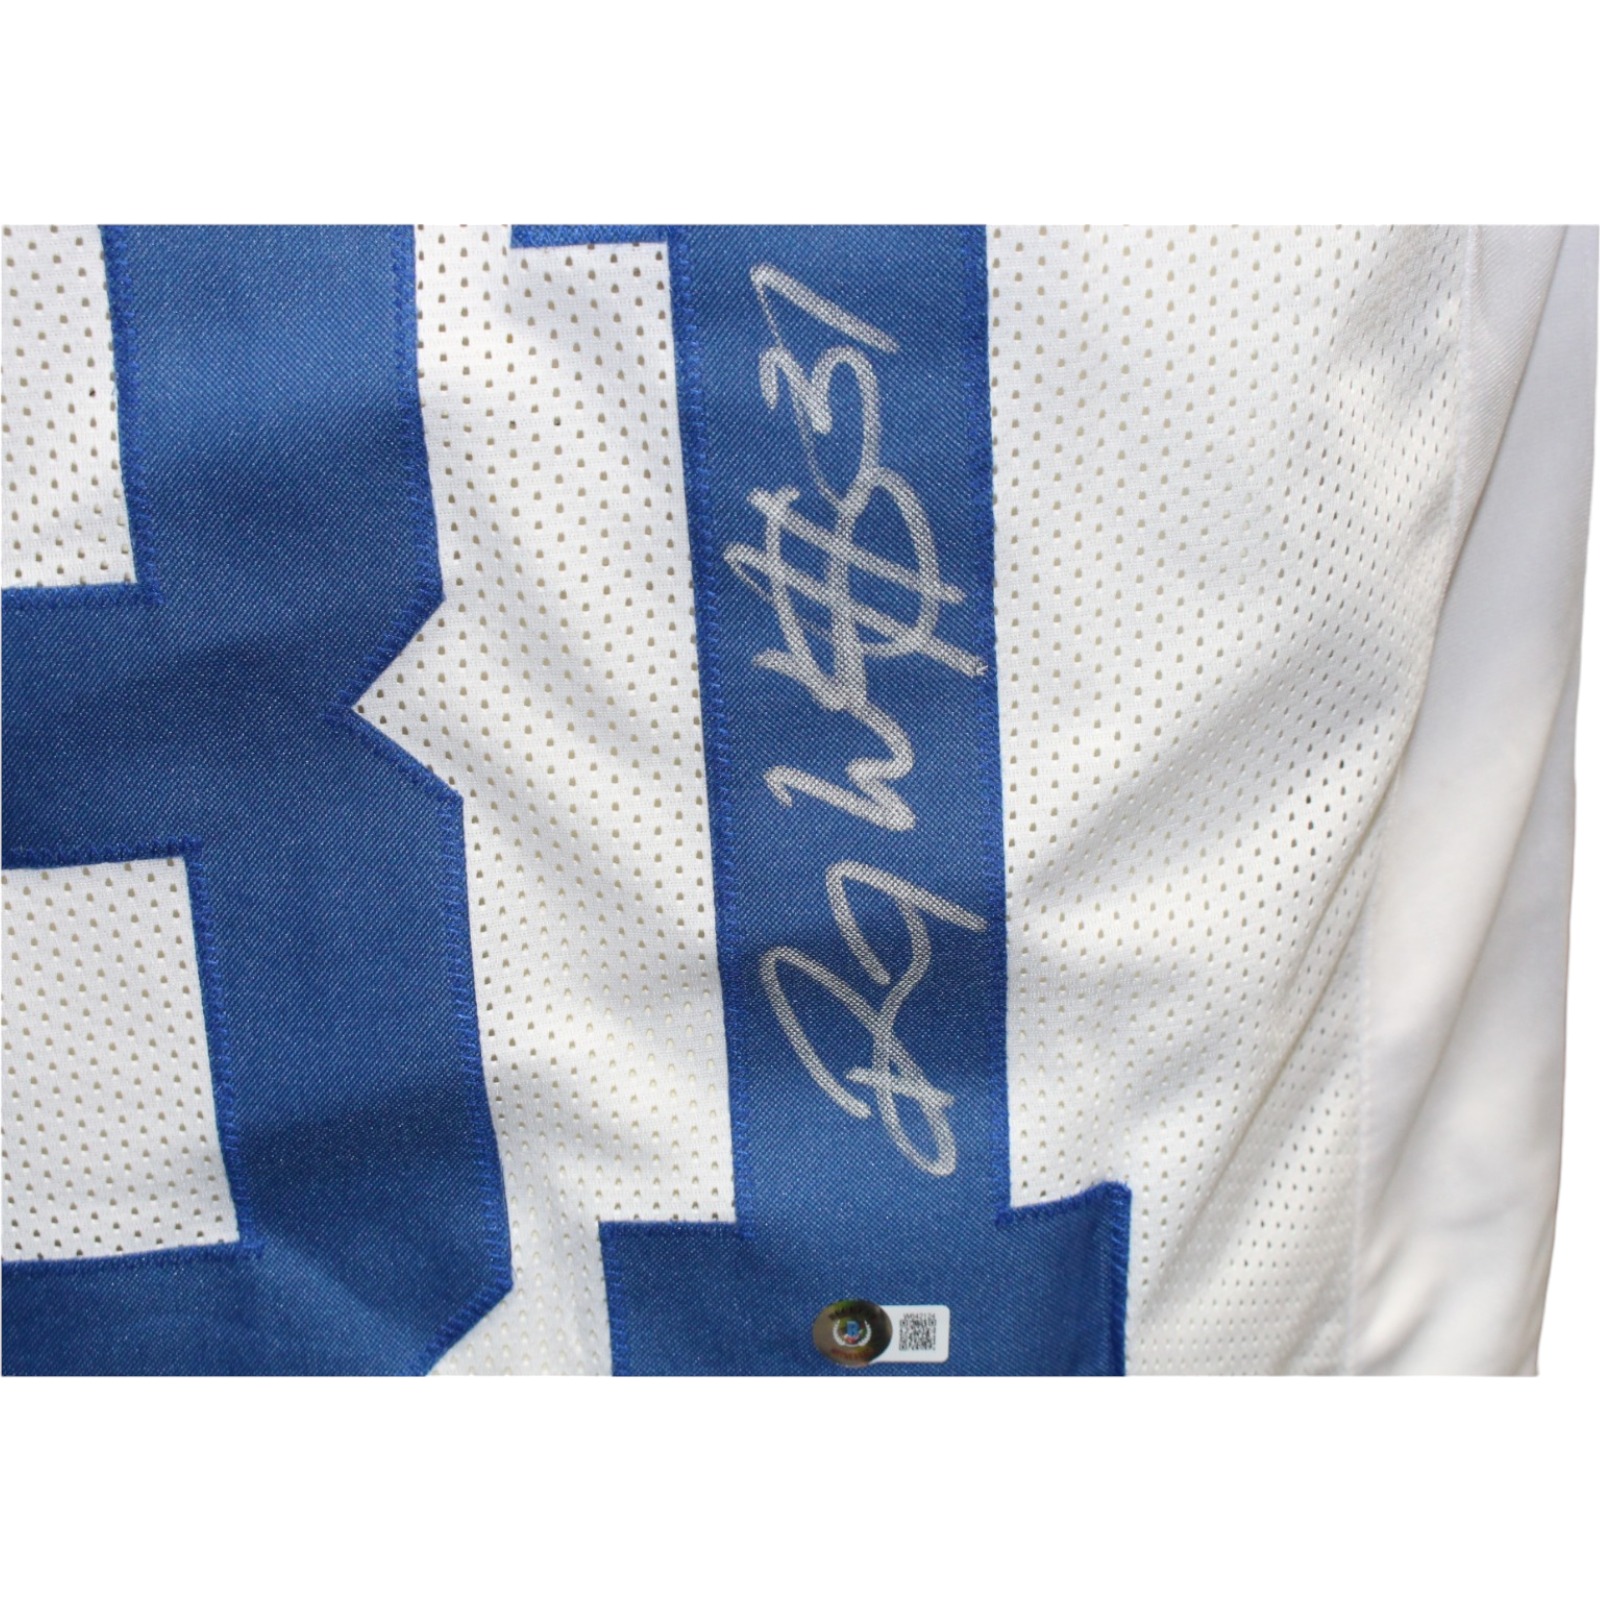 Roy Williams Autographed/Signed Pro Style White Jersey Beckett